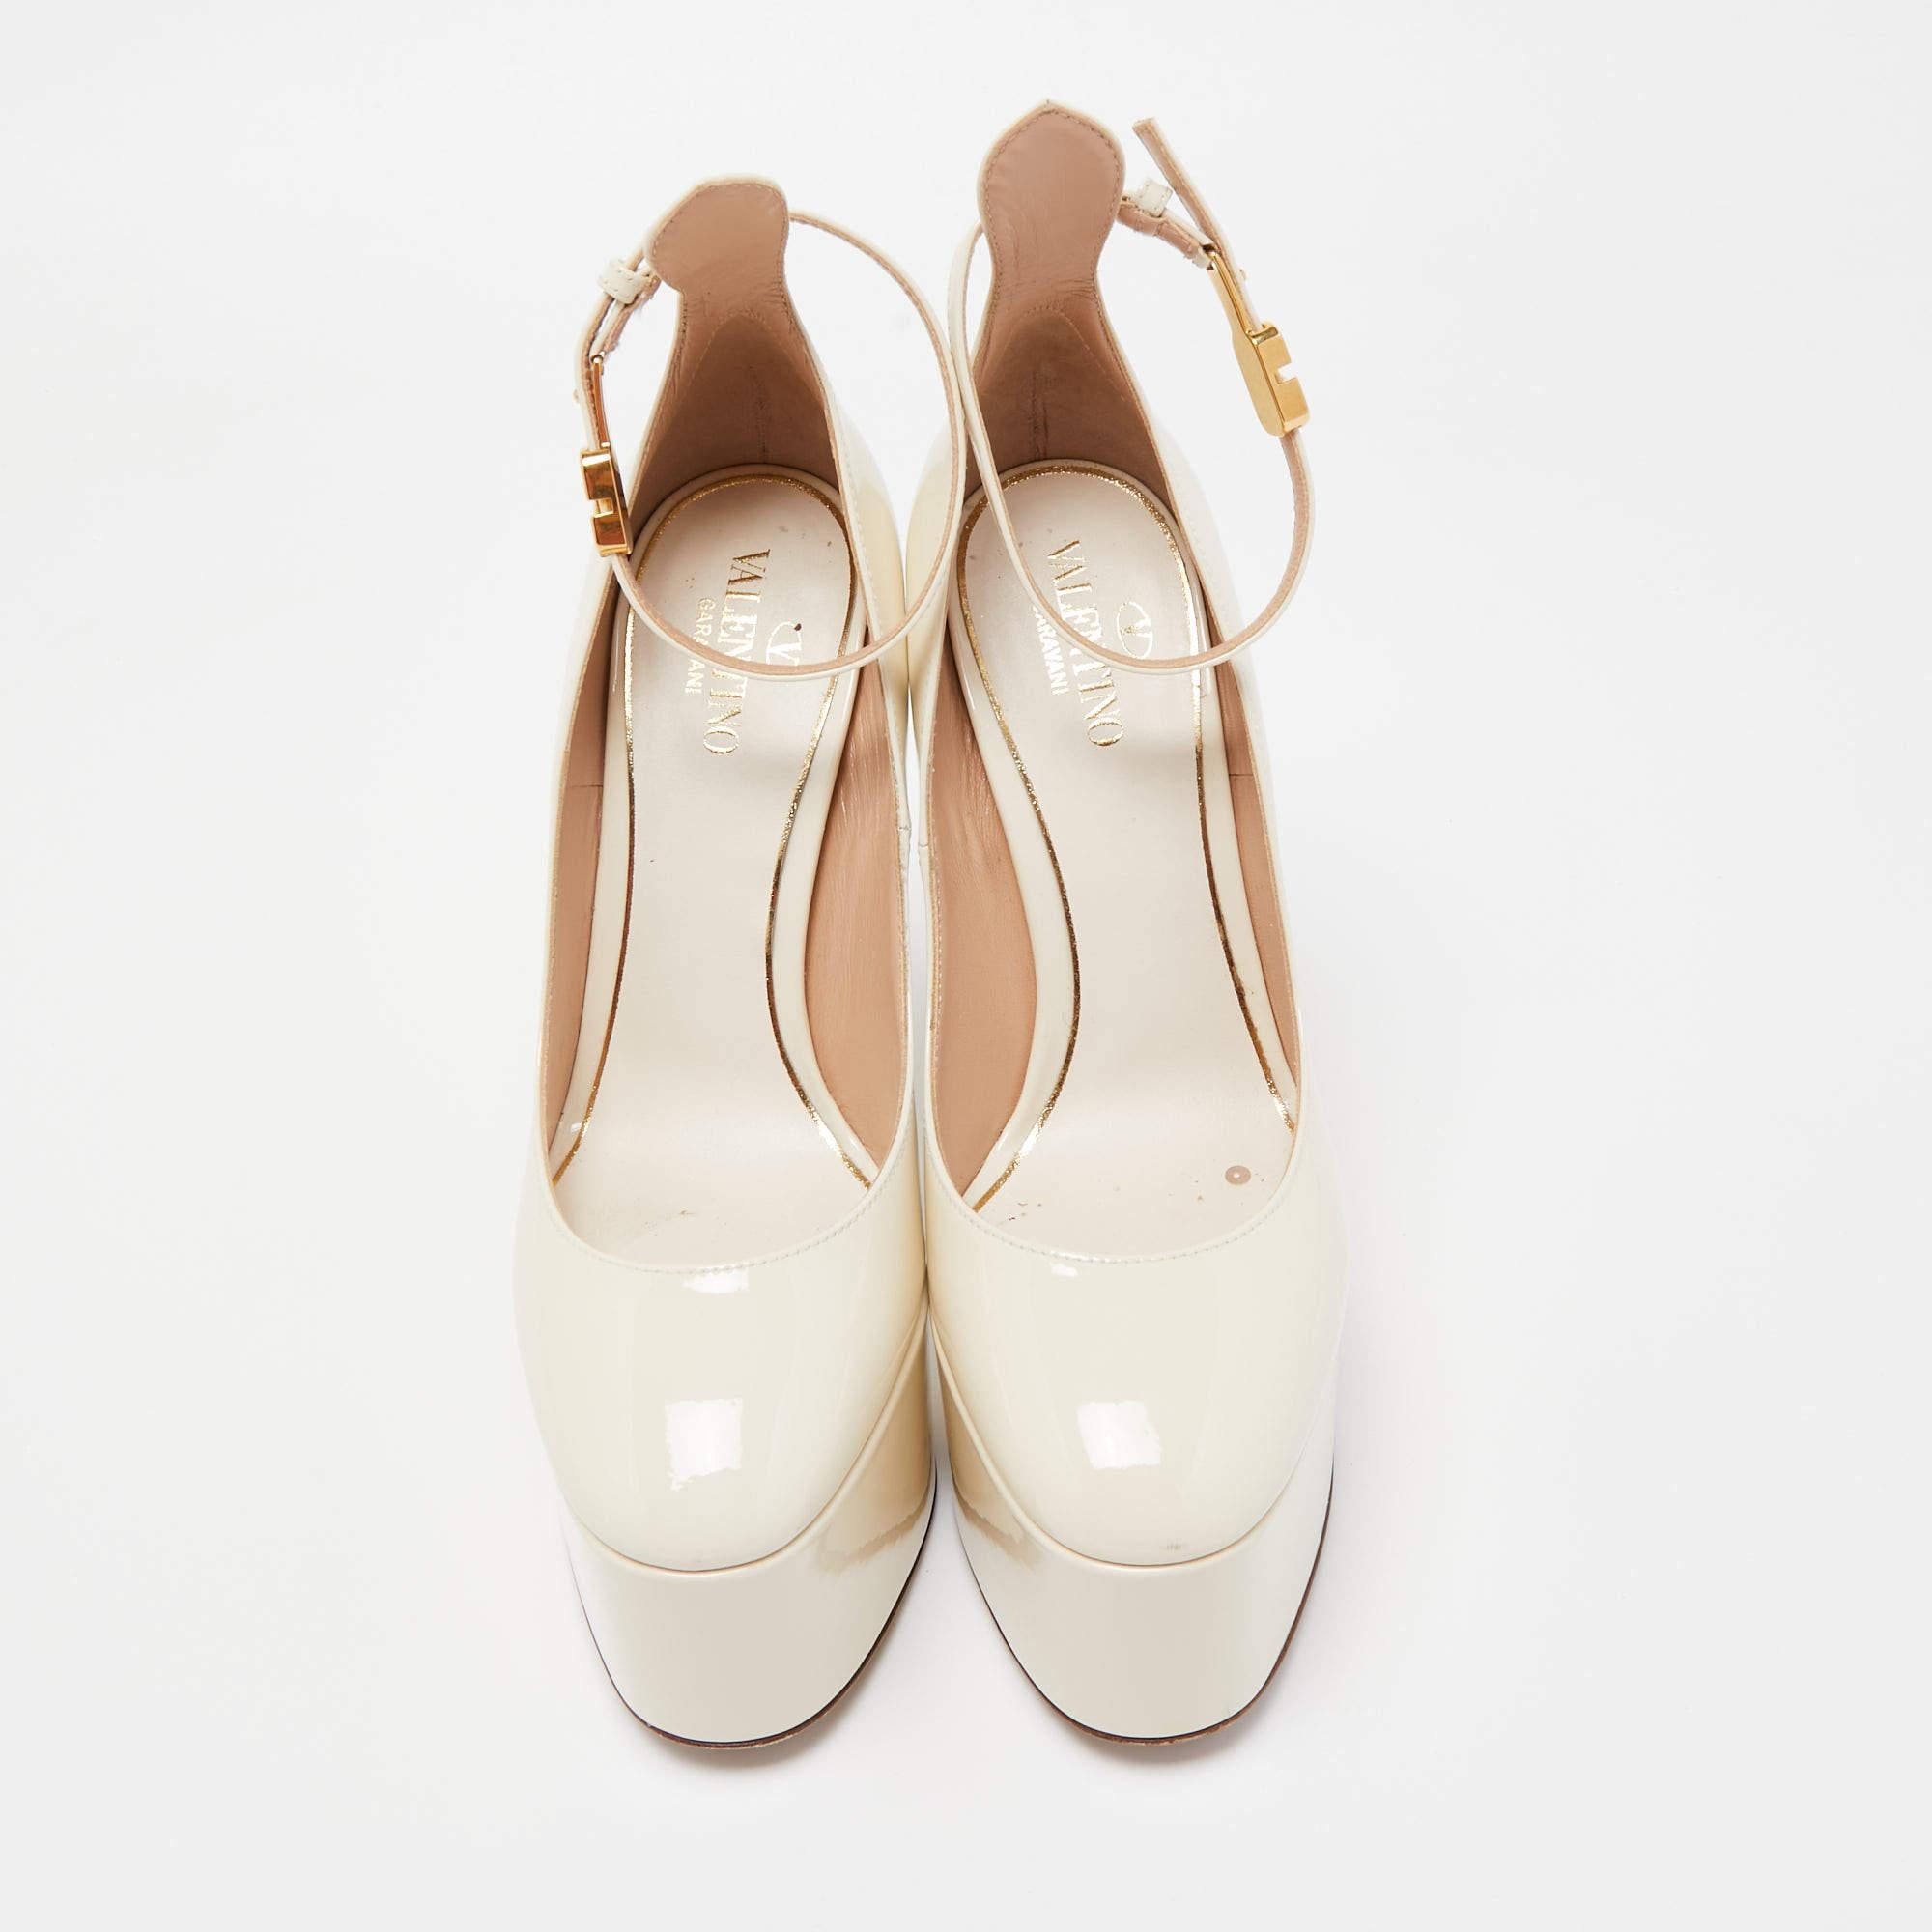 Exuding femininity and elegance, these pumps feature a chic silhouette with an attractive design. You can wear these pumps for a stylish look.

Includes: Original Dustbag, Original Box

